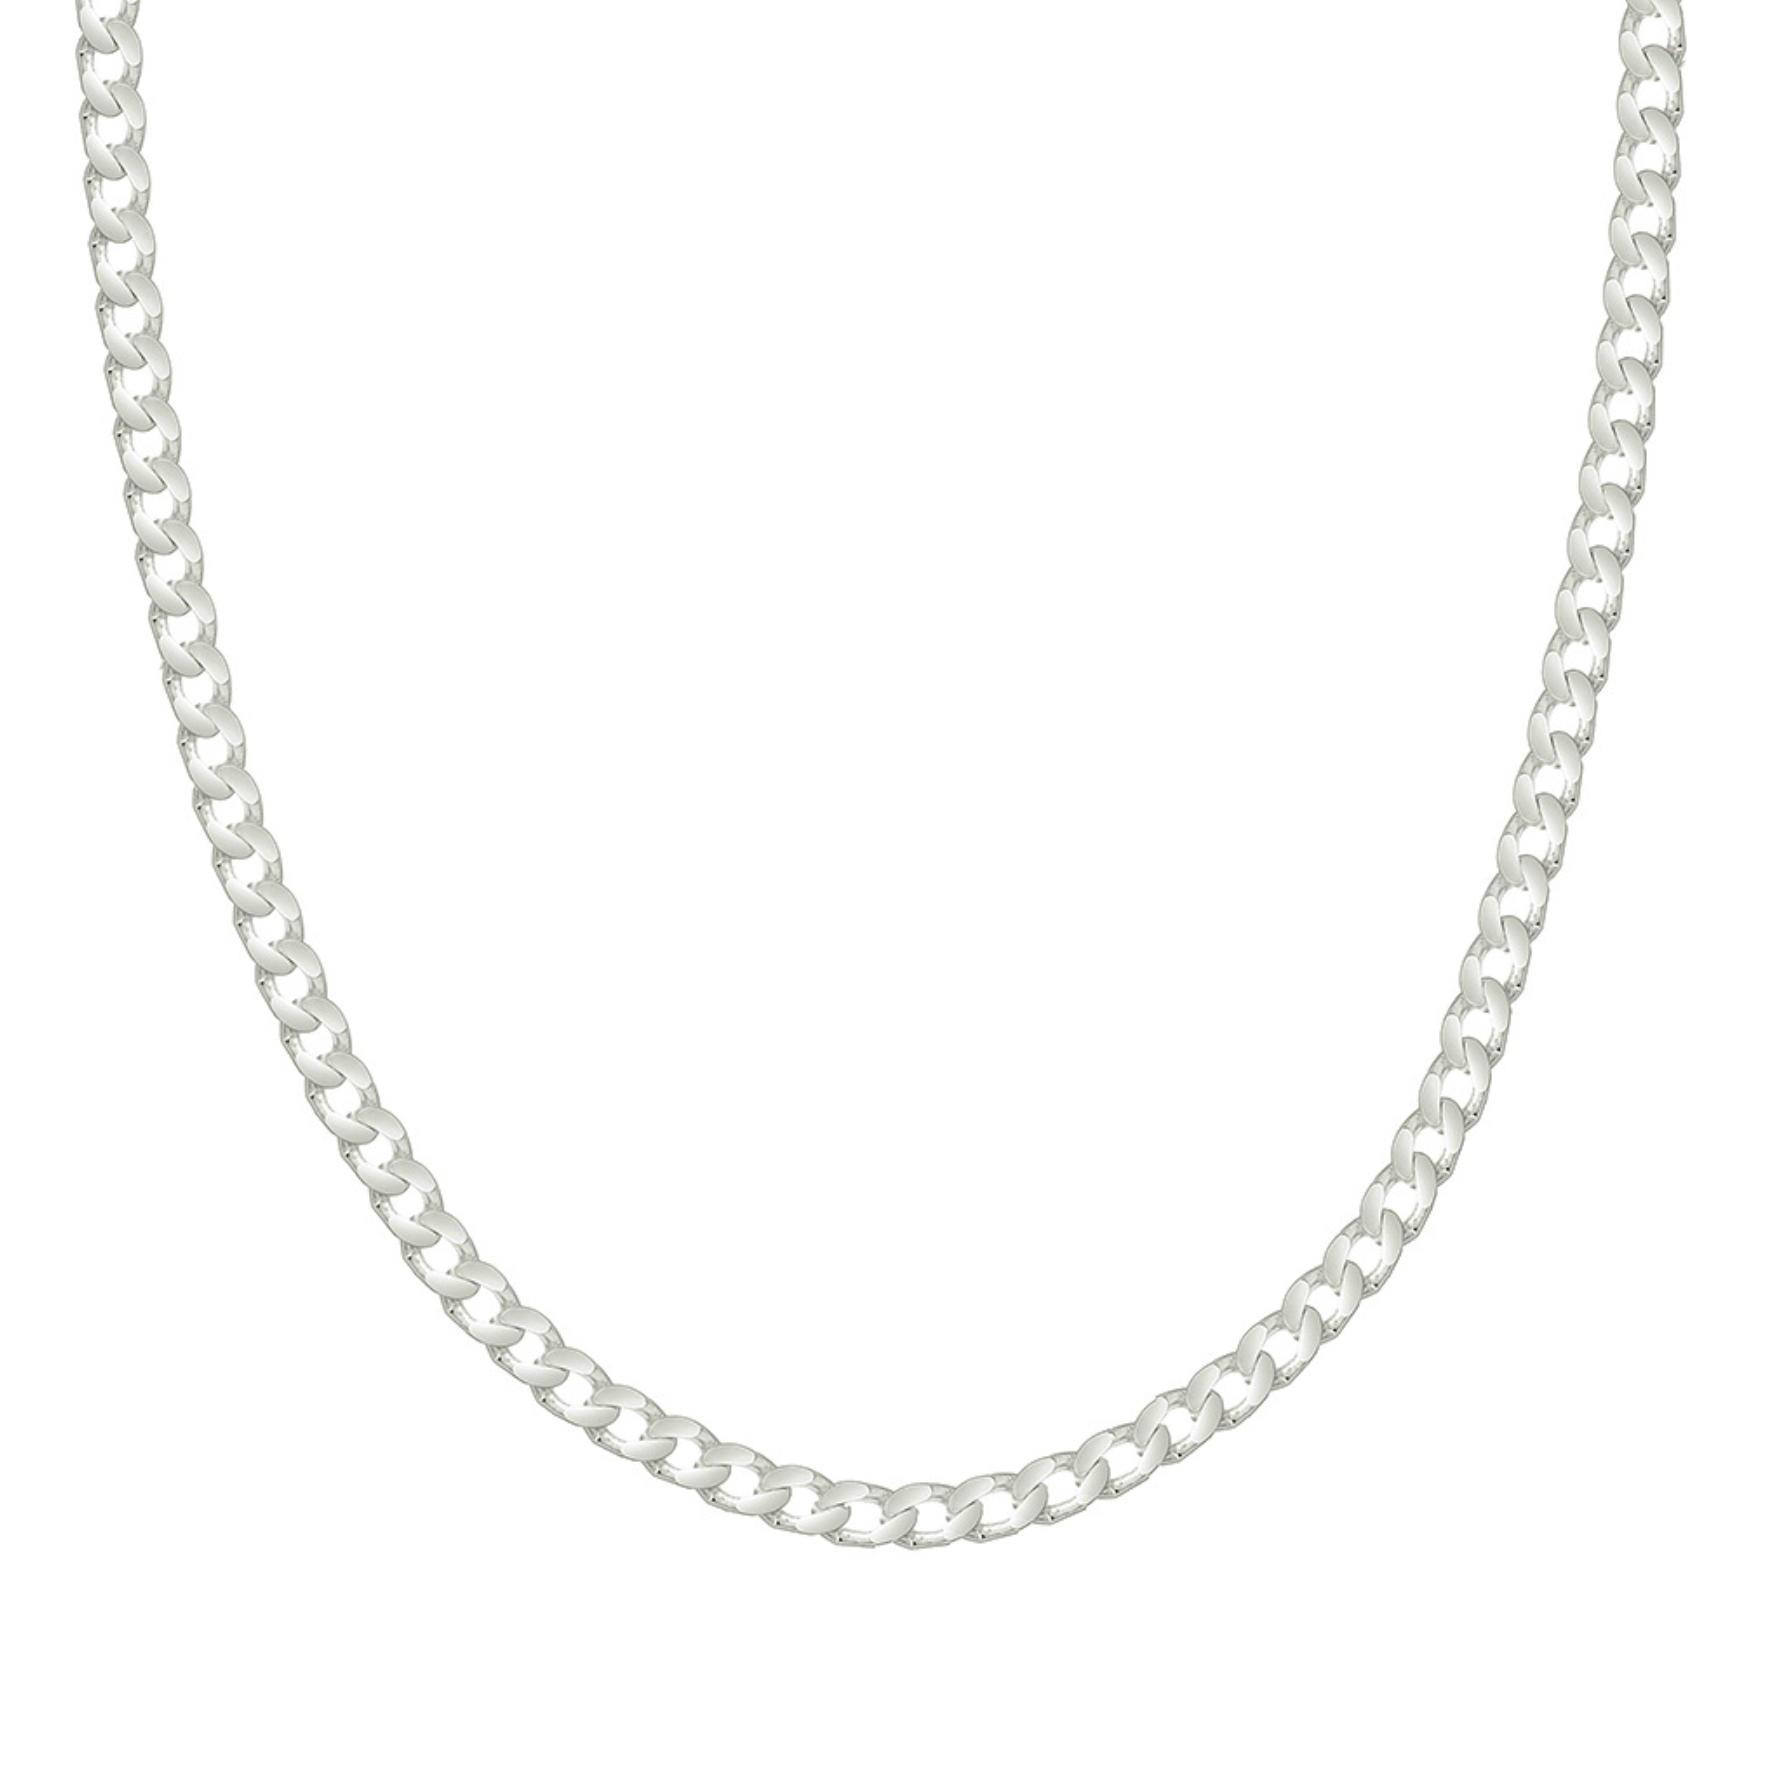 Line Panzer Necklace from A-Hjort Jewellery in Silver Sterling 925